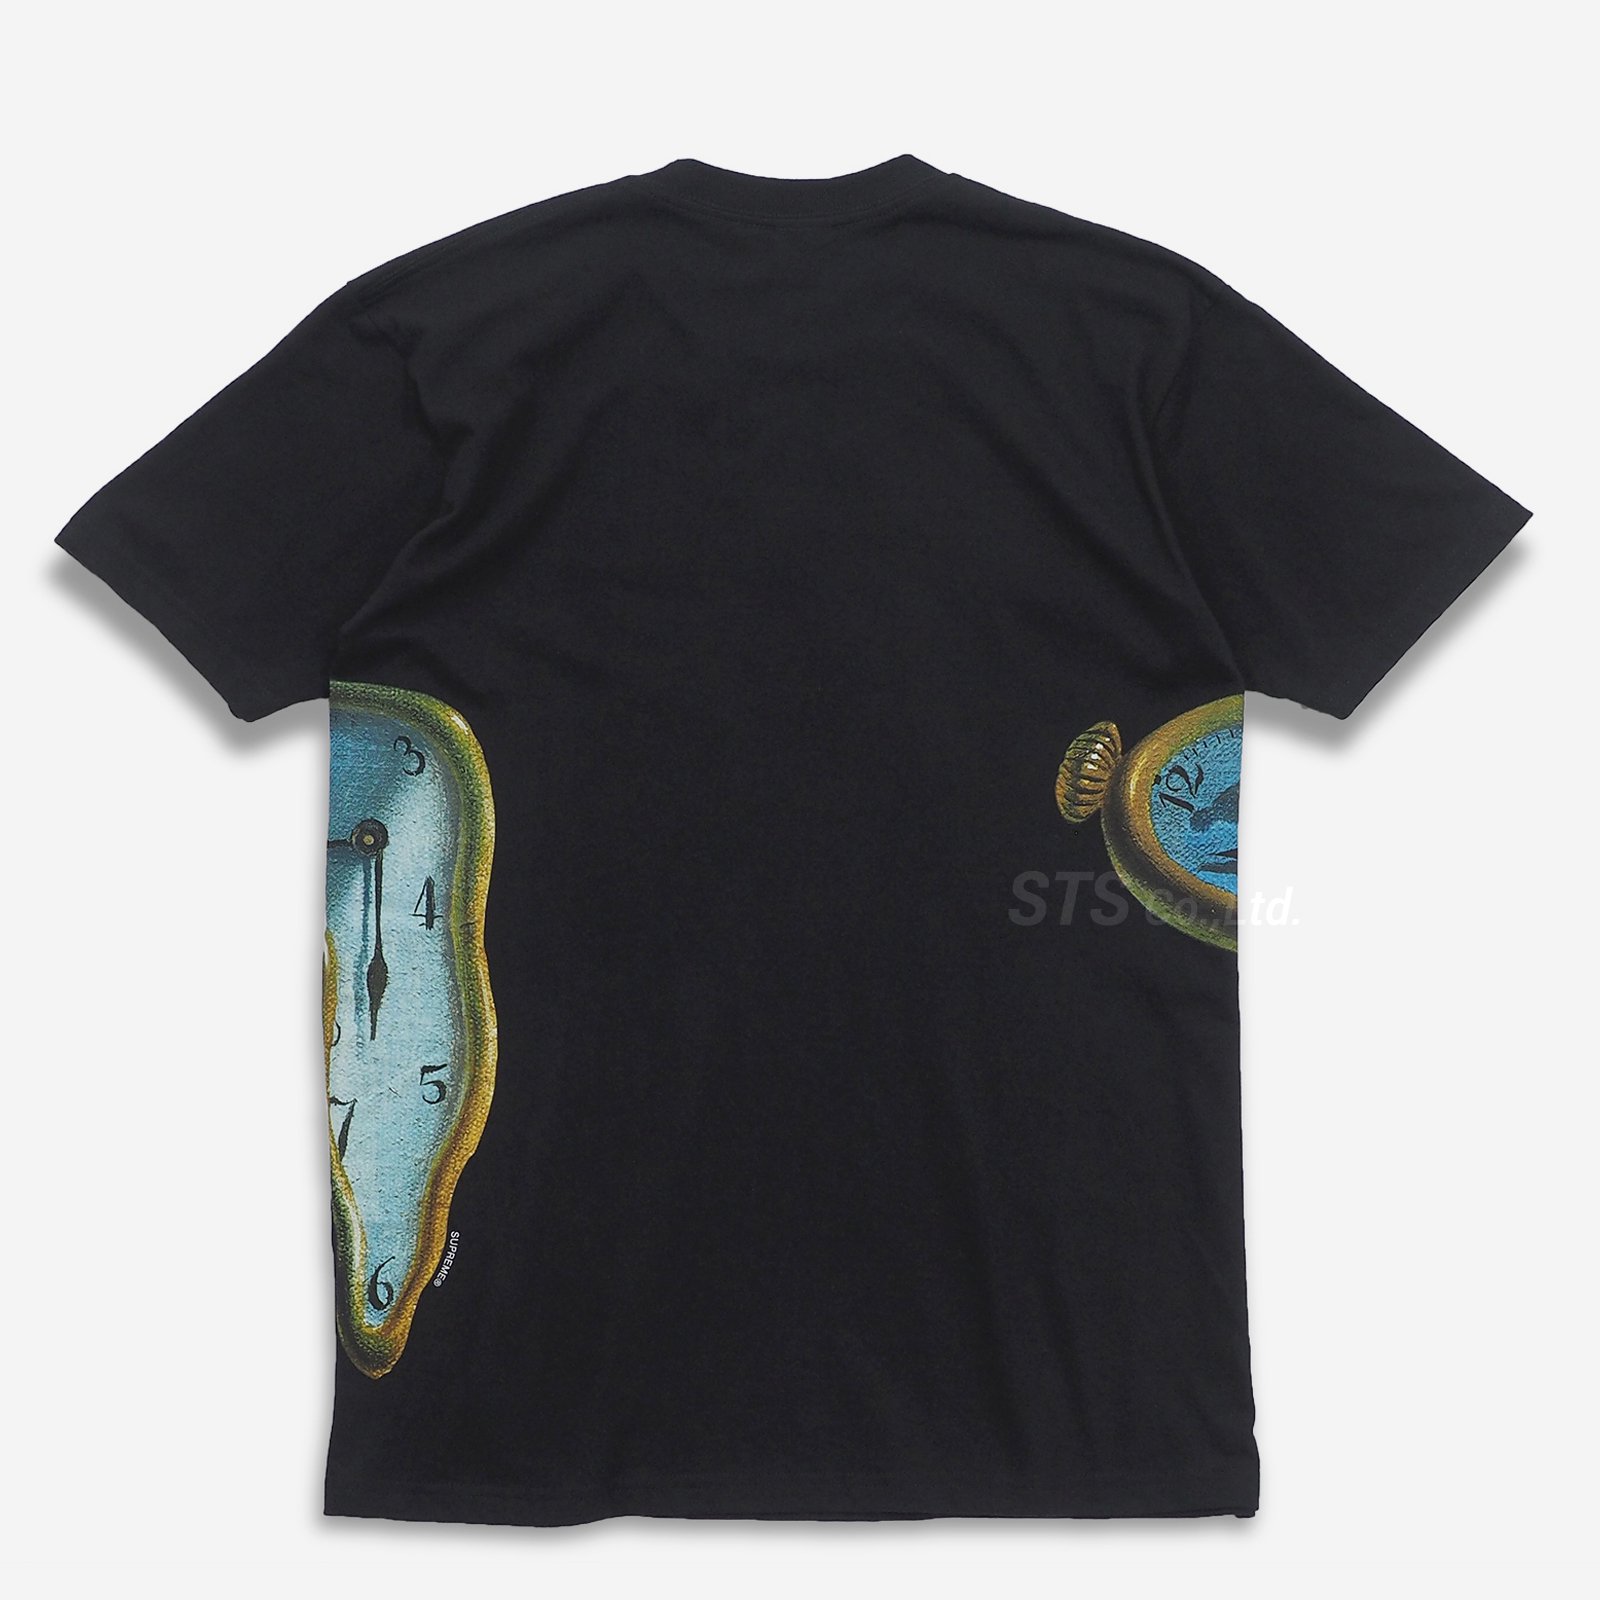 【 Black M 】The Persistence Of Memory Tee